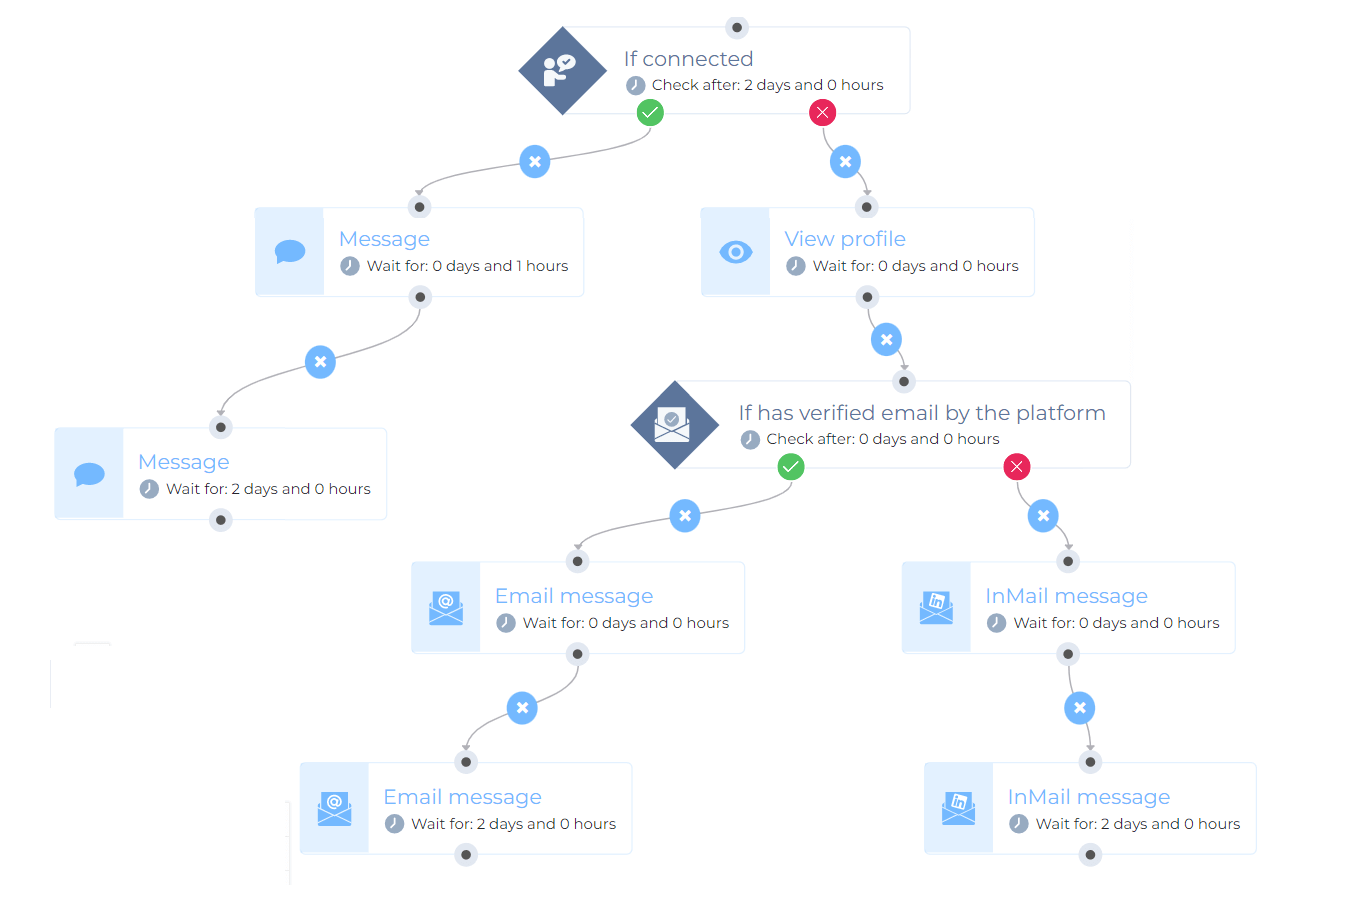 Image of Skylead's Smart Sequence to outreach and connect with someone on LinkedIn